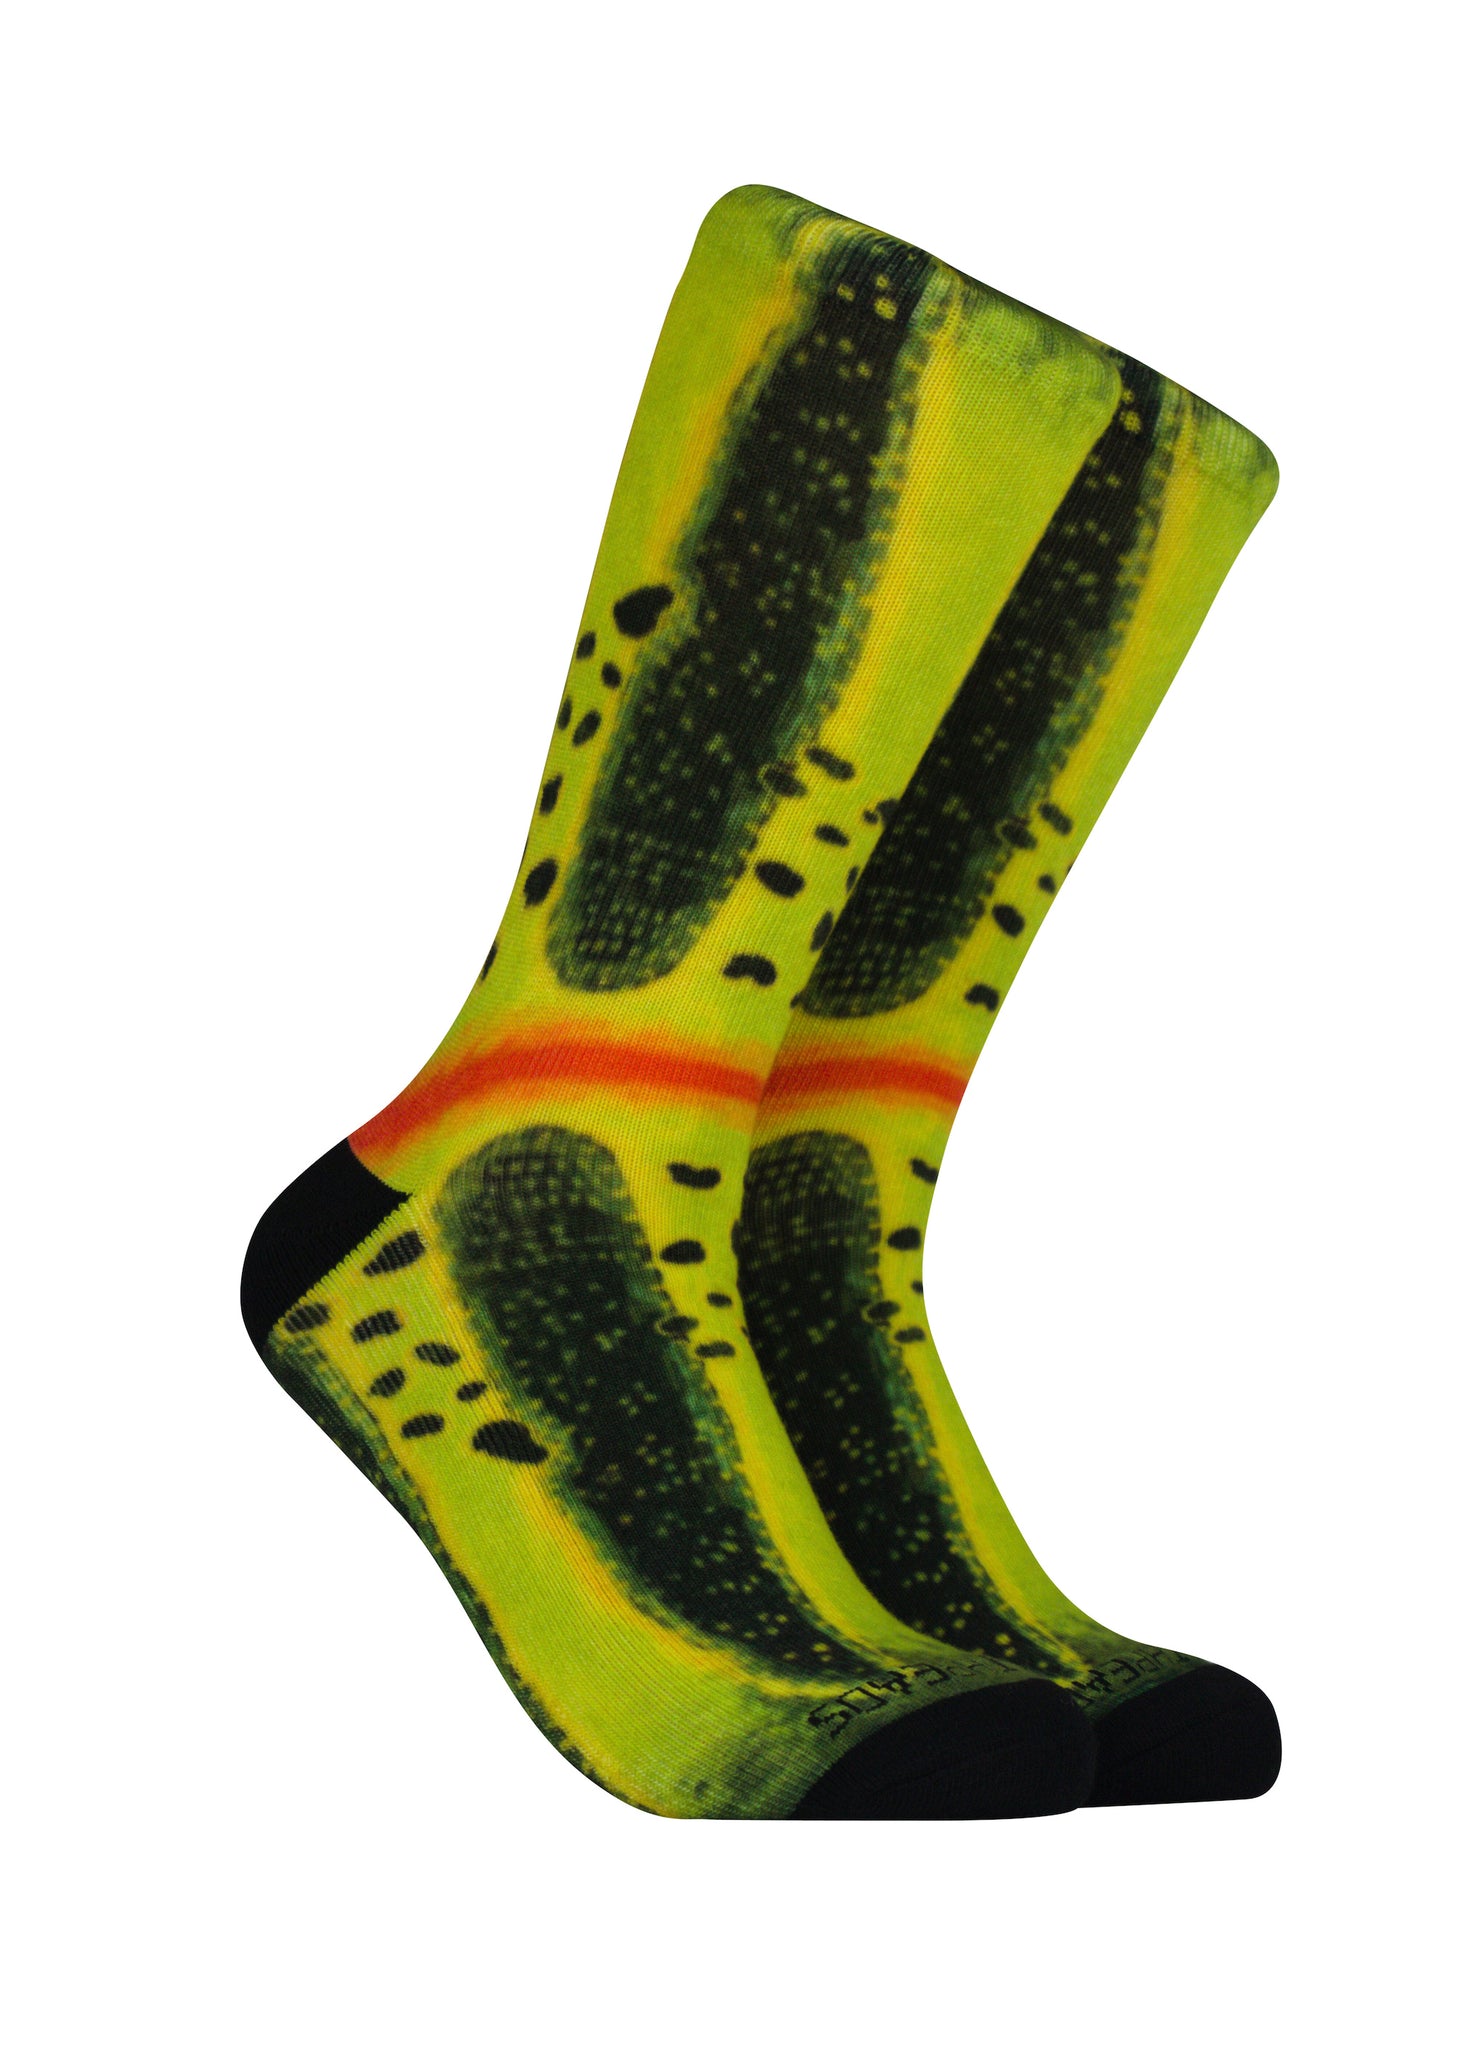 Peacock Bass Socks - Fish Patterned Clothing- Gifts for Fishermen